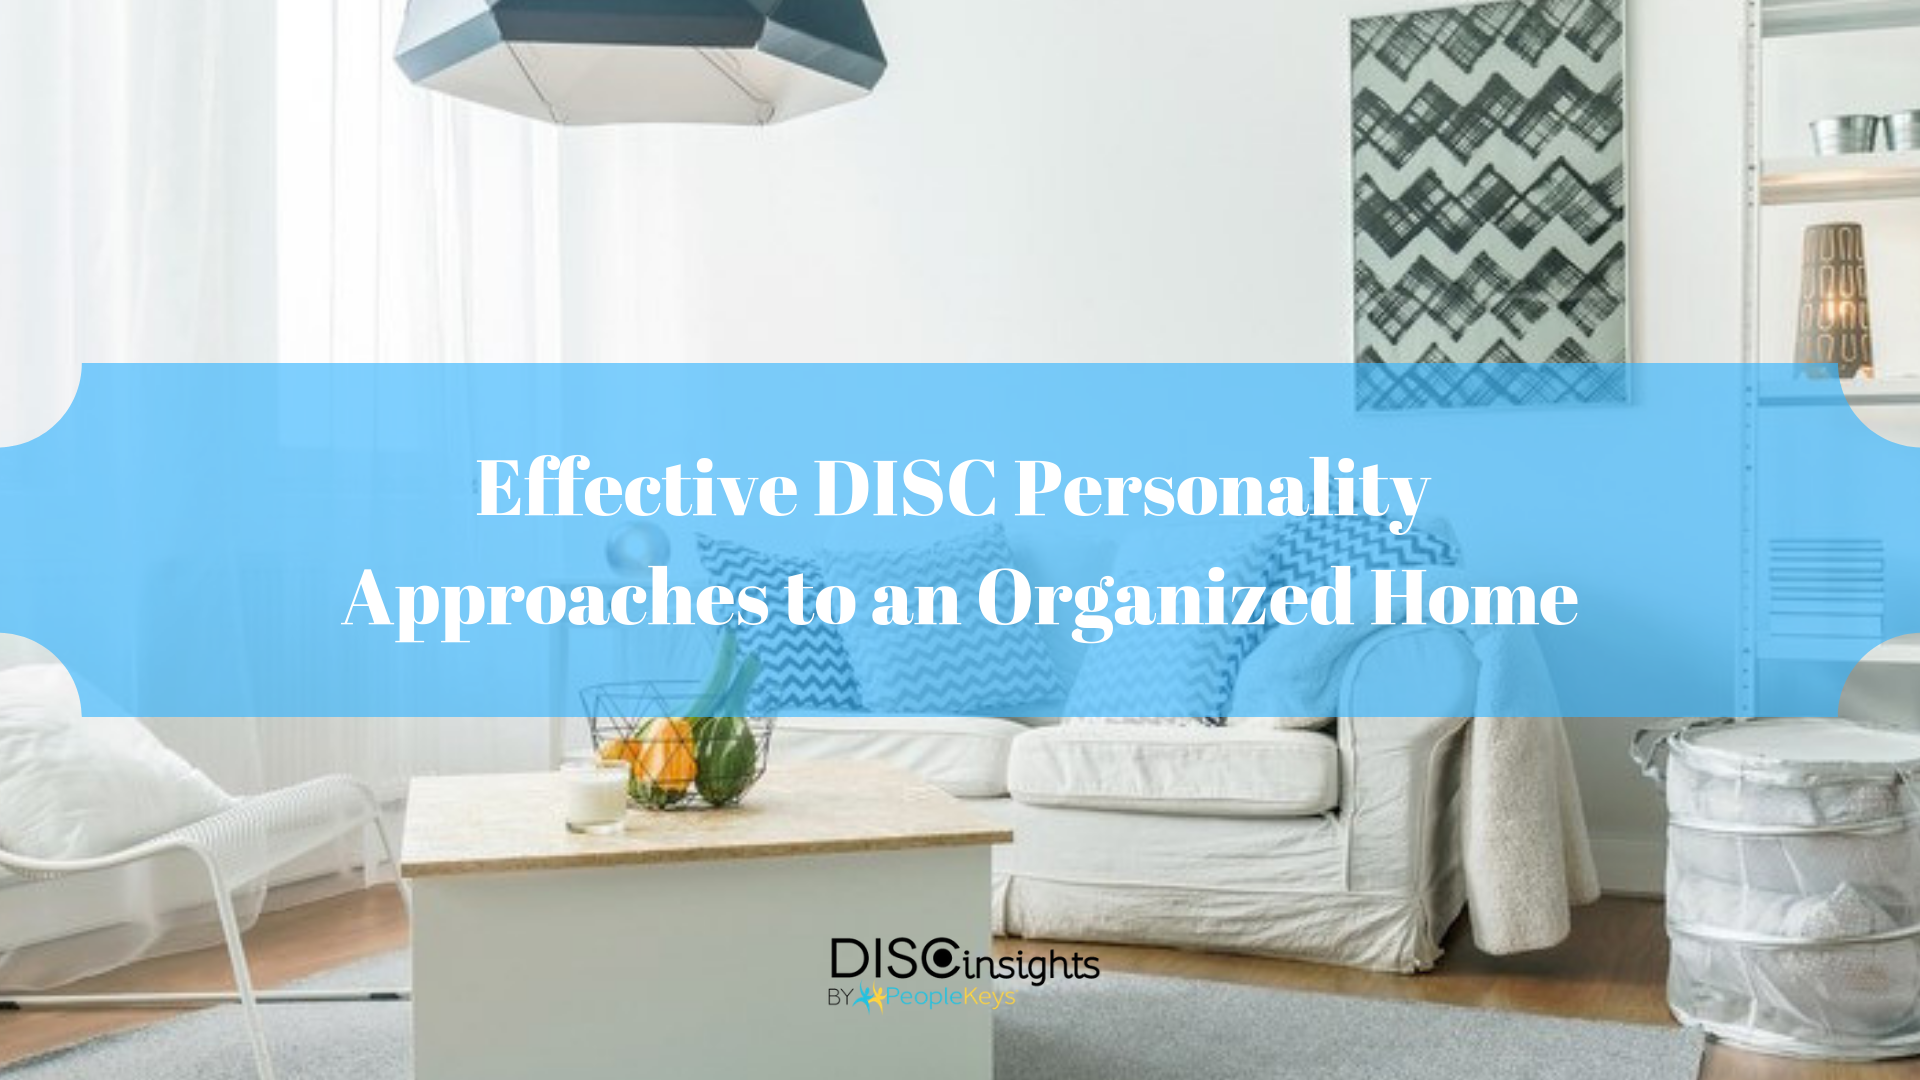 Effective DISC Personality Approaches to an Organized Home